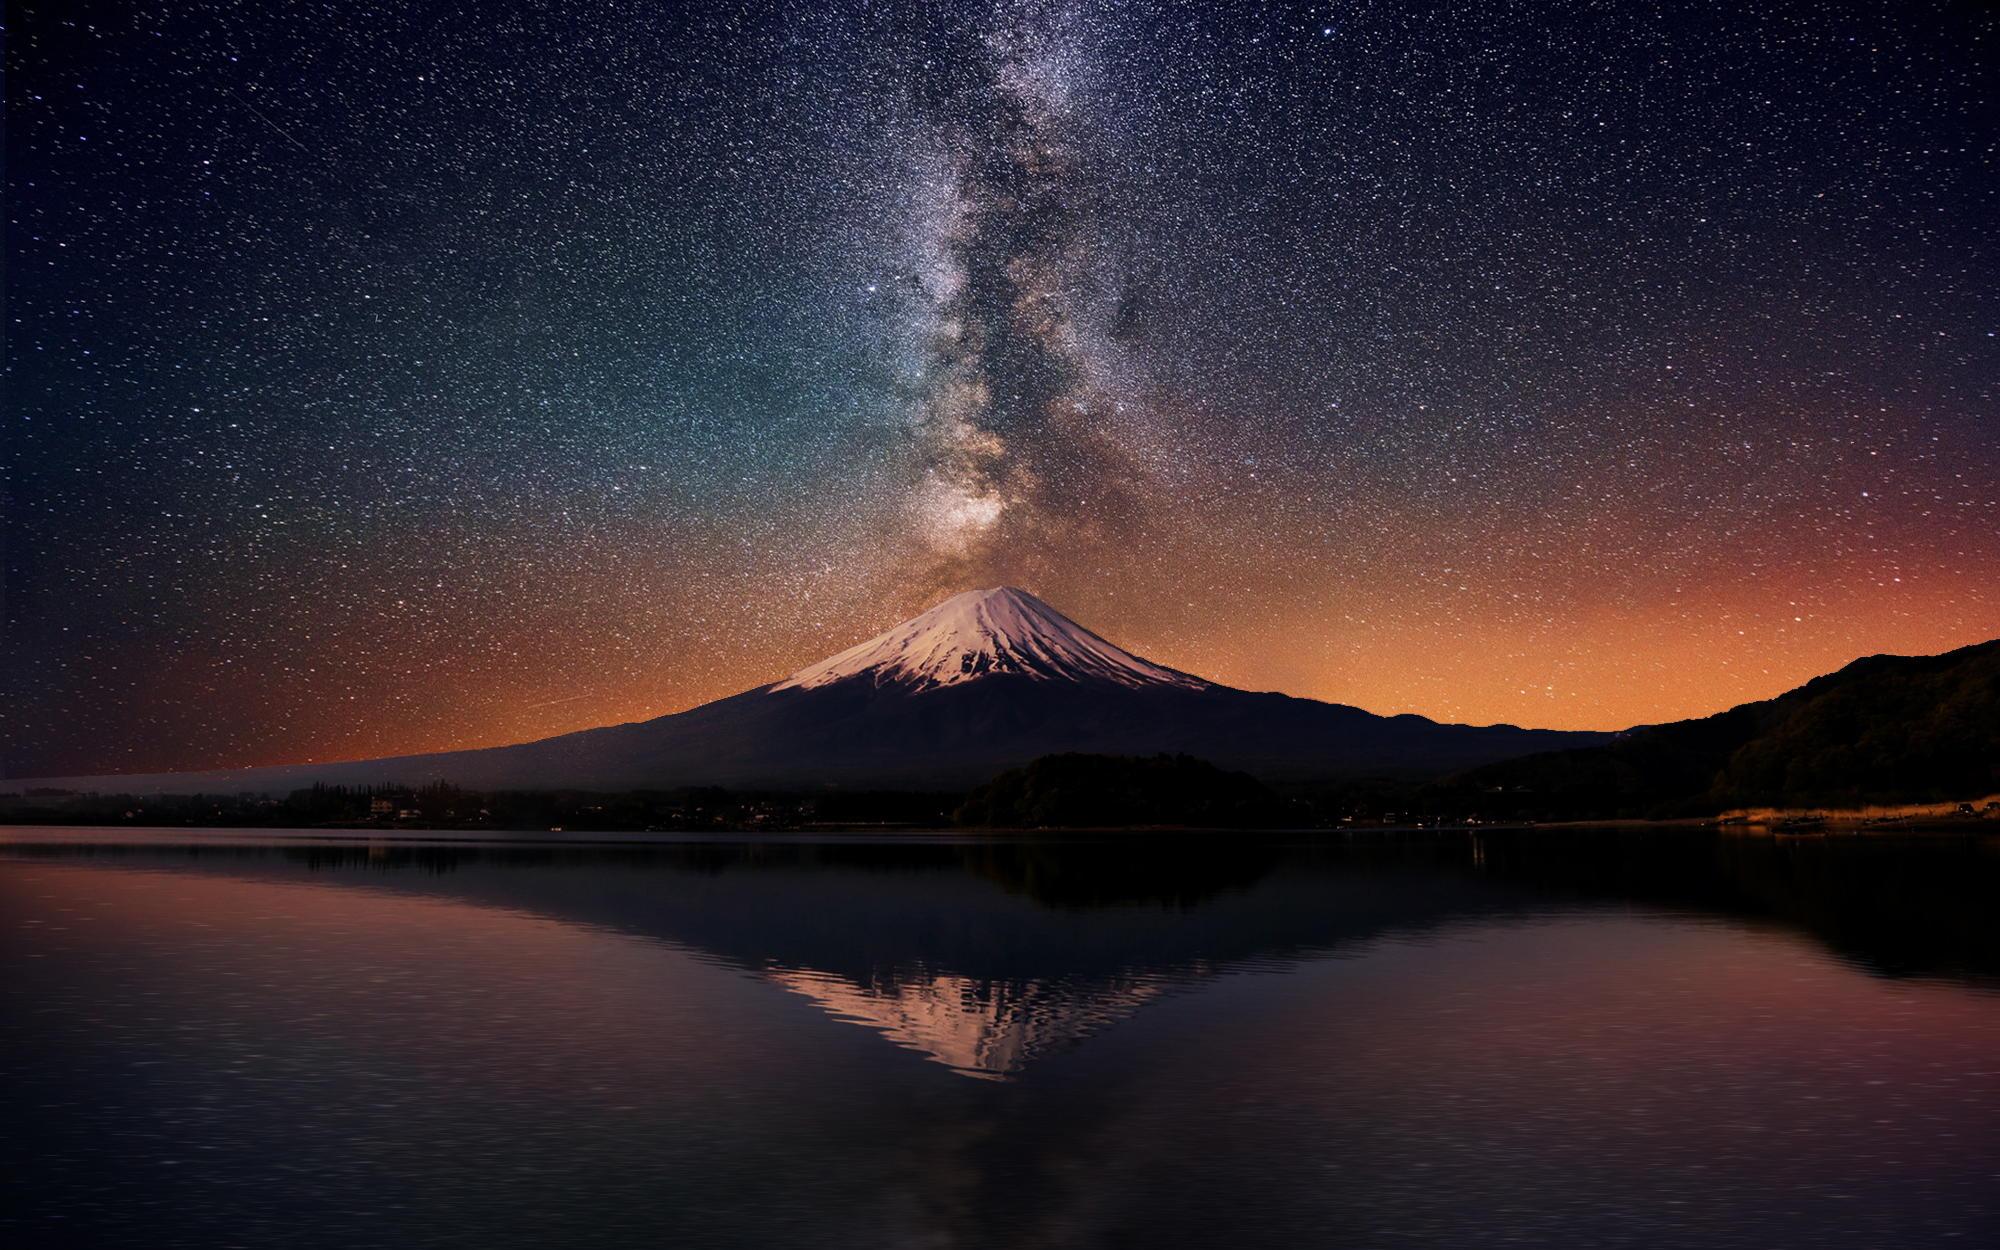 Mount Fuji with the Milky Way